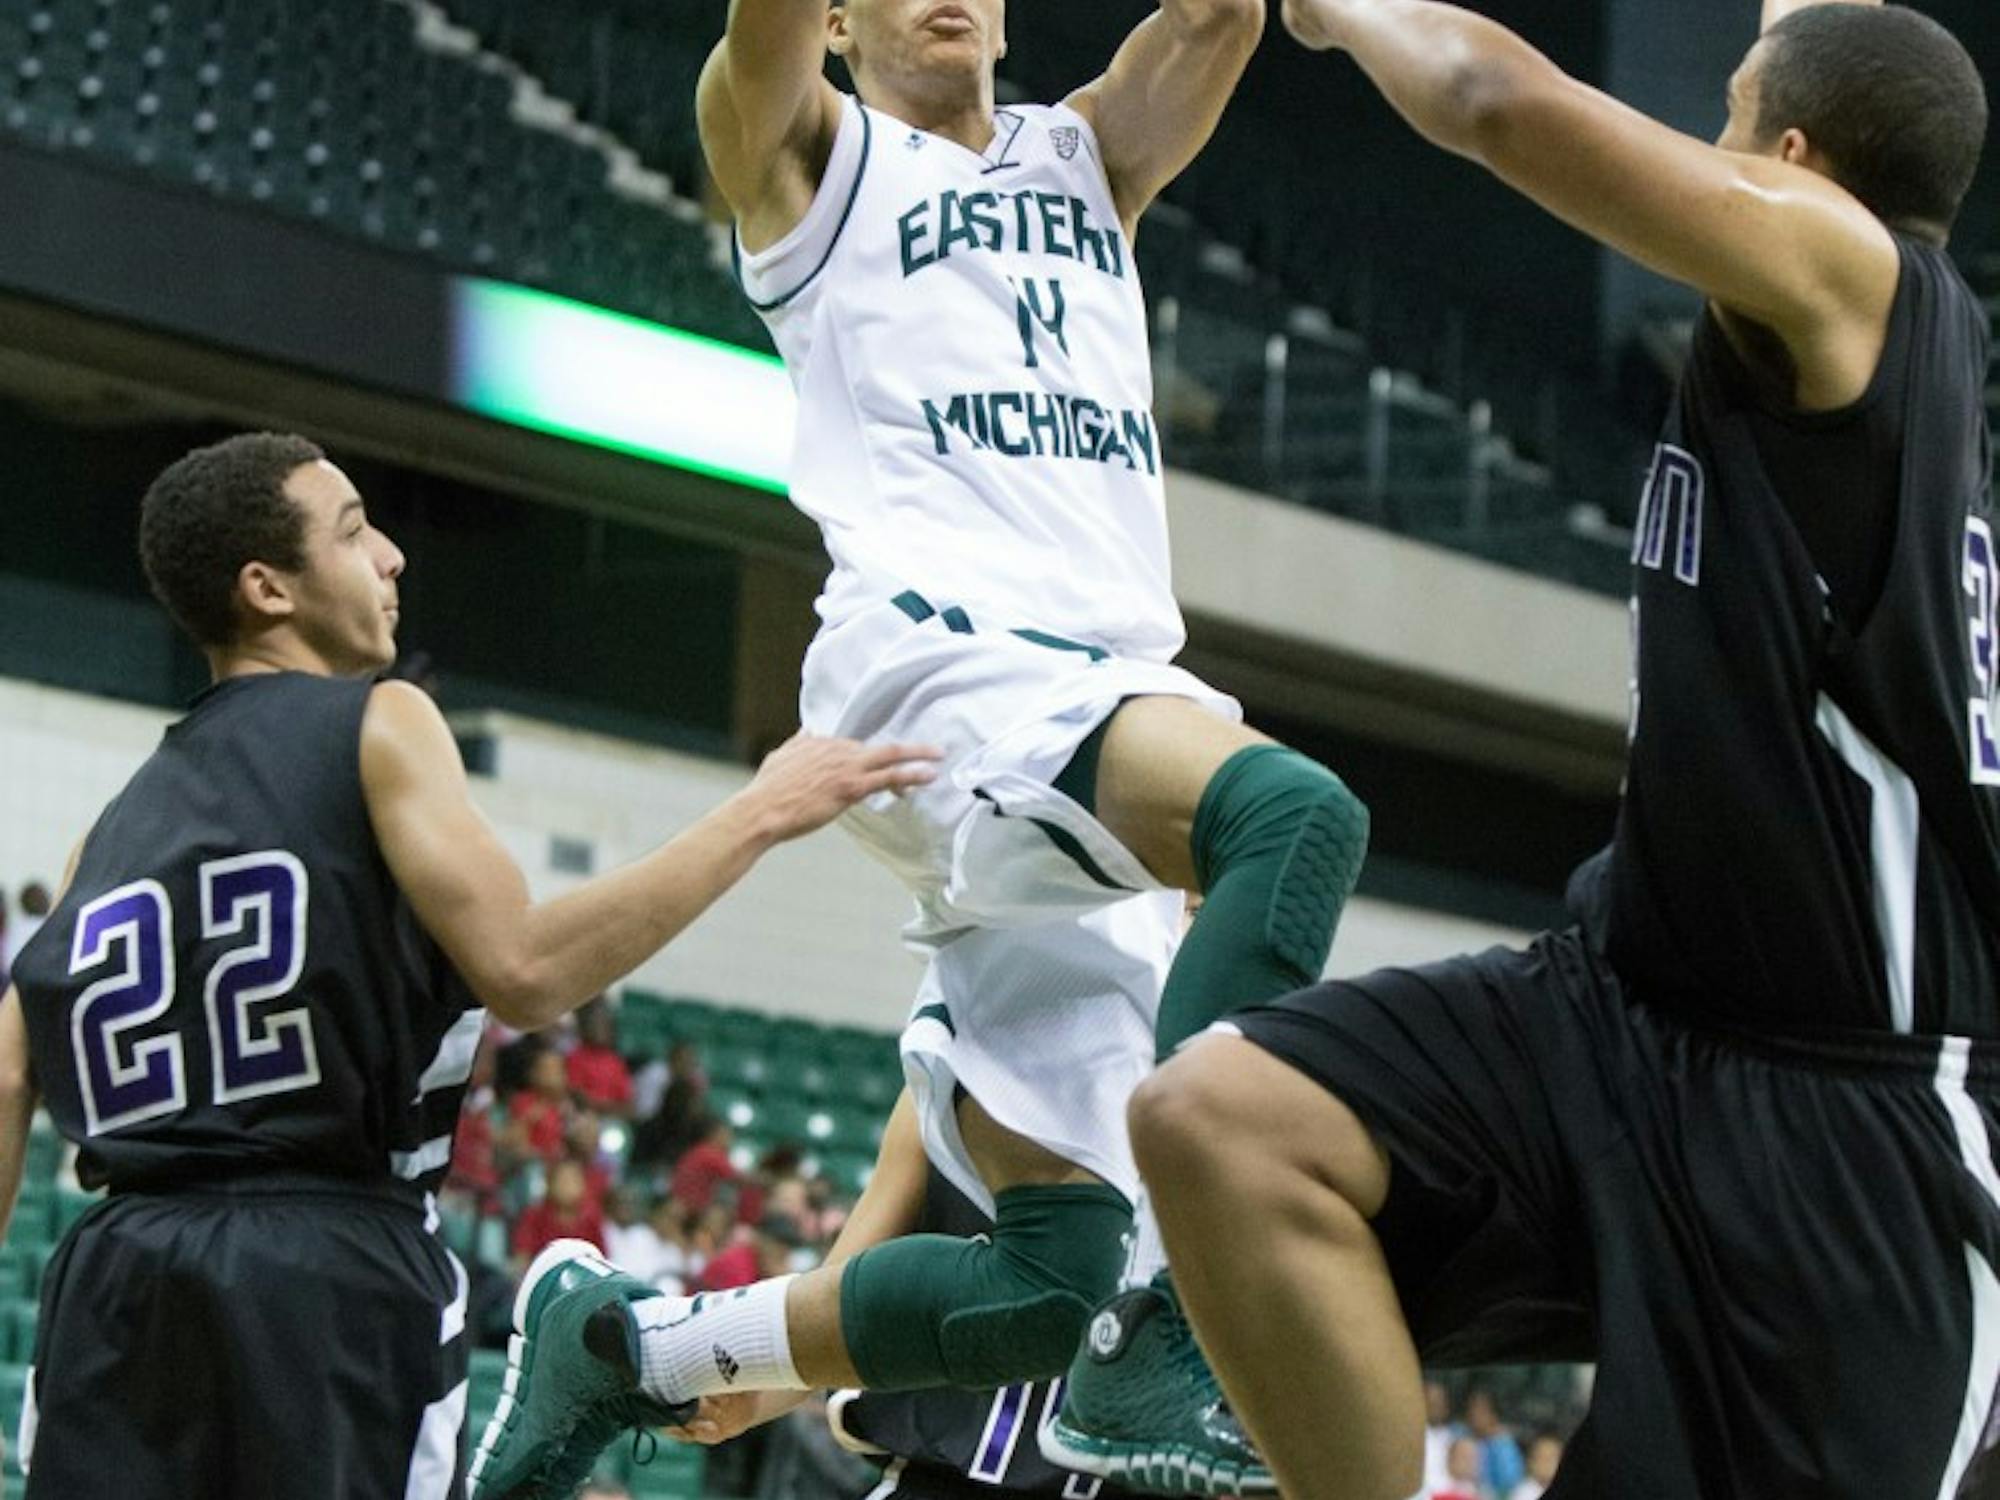 Eagle forward Karrington Ward made his EMU debut Friday and put up 17 points in 16 minutes played.